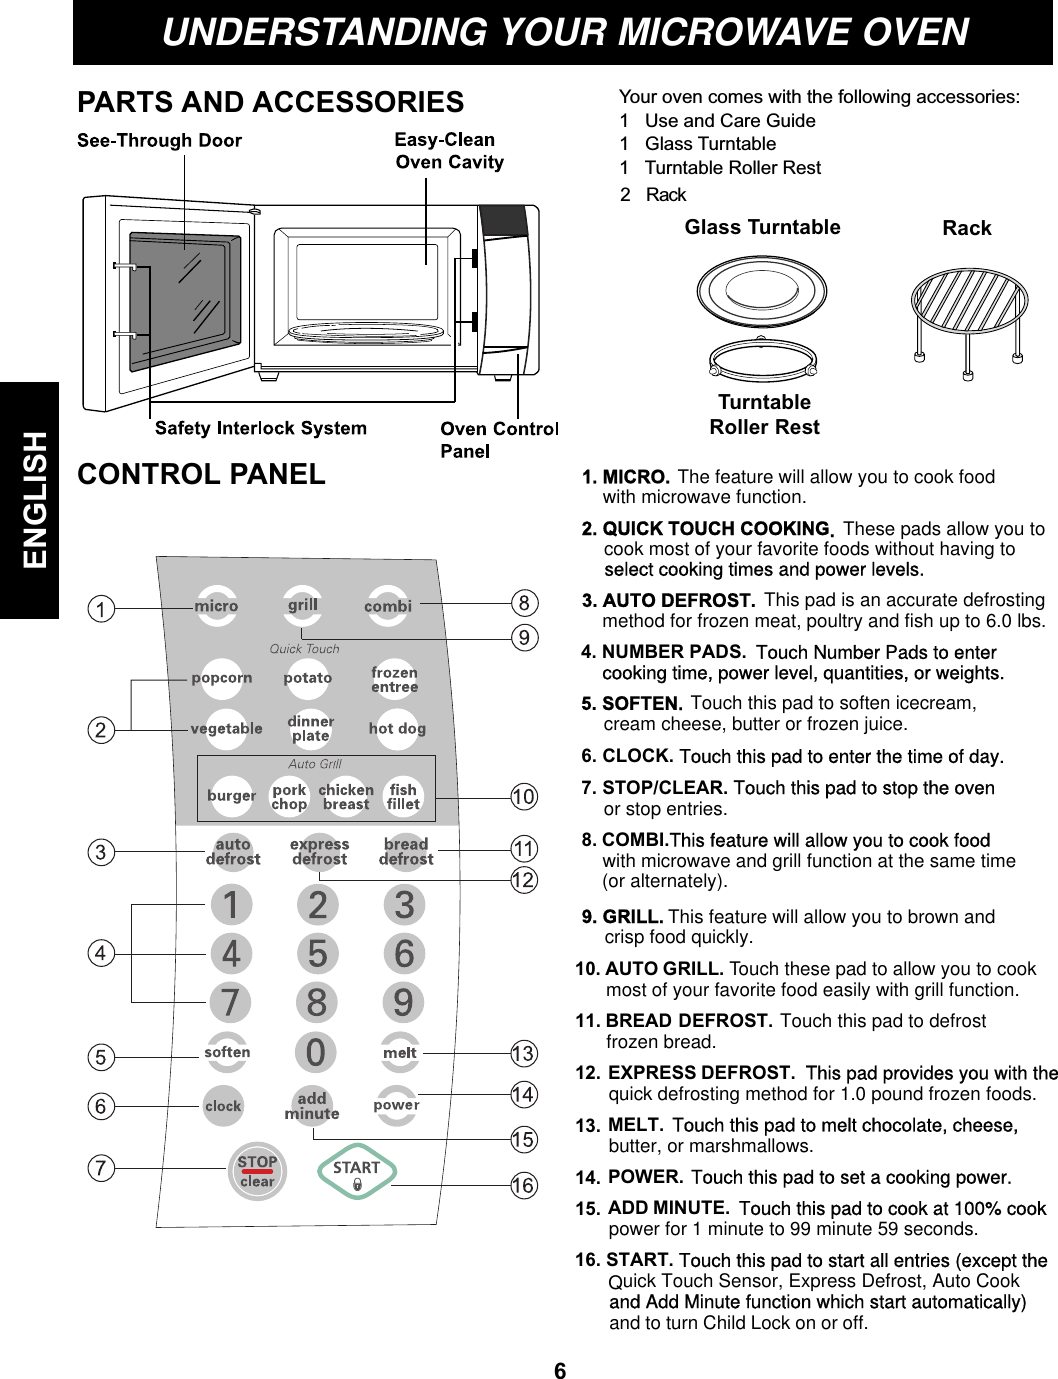 Your oven comes with the following accessories:1   Use and Care Guide1   Glass Turntable1   Turntable Roller RestUNDERSTANDING YOUR MICROWAVE OVENPARTS AND ACCESSORIESCONTROL PANELTurntableRoller RestGlass TurntableENGLISHRack61. MICRO. The feature  will  allow you to cook foodwith microwave function.2. QUICK TOUCH COOKING. These pads allow you tocook most of your favorite foods without having toselect cooking times and power levels.3. AUTO DEFROST. This pad is an accurate defrostingmethod for frozen meat, poultry and fish up to 6.0 lbs.4. NUMBER PADS.  Touch Number Pads to enter    cooking time, power level, quantities, or weights.6. CLOCK. Touch this pad to enter the time of day.5. SOFTEN. Touch this pad to soften icecream,7. STOP/CLEAR. Touch this pad to stop the oven EXPRESS DEFROST. This pad provides you with thequick defrosting method for 1.0 pound frozen foods.11. BREAD DEFROST. Touch this pad to defrostfrozen bread.12. MELT. Touch this pad to melt chocolate, cheese, butter, or marshmallows.power for 1 minute to 99 minute 59 seconds.13. POWER. Touch this pad to set a cooking power. 14. ADD MINUTE. Touch this pad to cook at 100% cook 15.  Quick Touch Sensor, Express Defrost, Auto Cookand Add Minute function which start automatically)16. START. Touch this pad to start all entries (except theand to turn Child Lock on or off.cream cheese, butter or frozen juice.or stop entries.8. COMBI.This feature will allow you to cook foodwith microwave and grill function at the same time(or alternately).9. GRILL. This feature will allow you to brown andcrisp food quickly.10. AUTO GRILL. Touch these pad to allow you to cook most of your favorite food easily with grill function.2   Rack